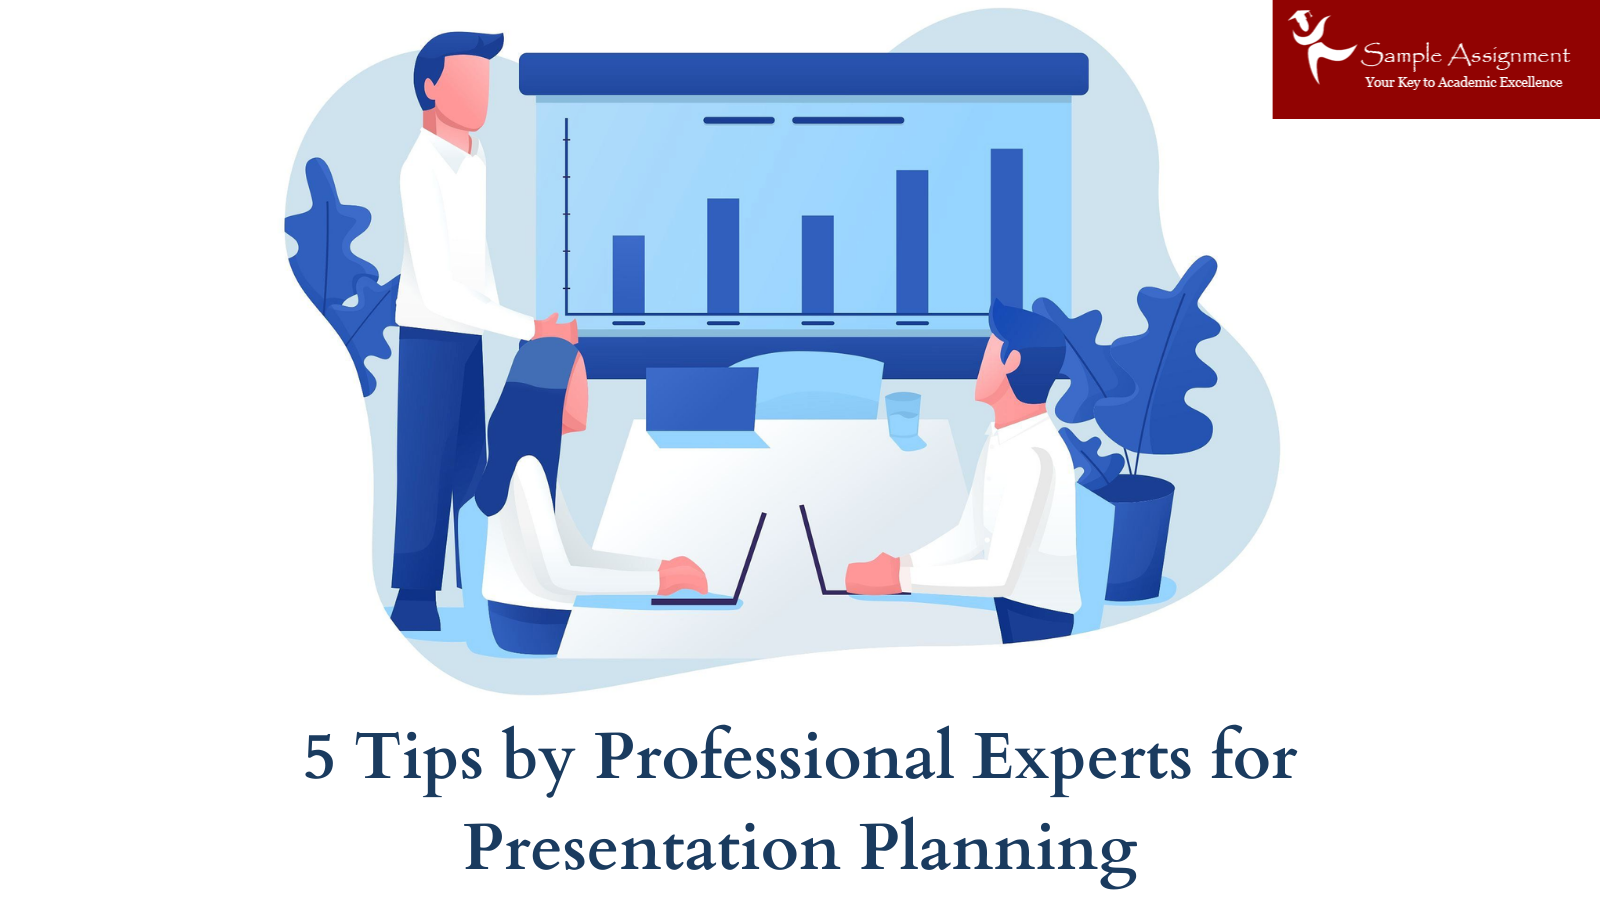 5 Tips by Professional Experts to Master the Art of Presentation Planning!